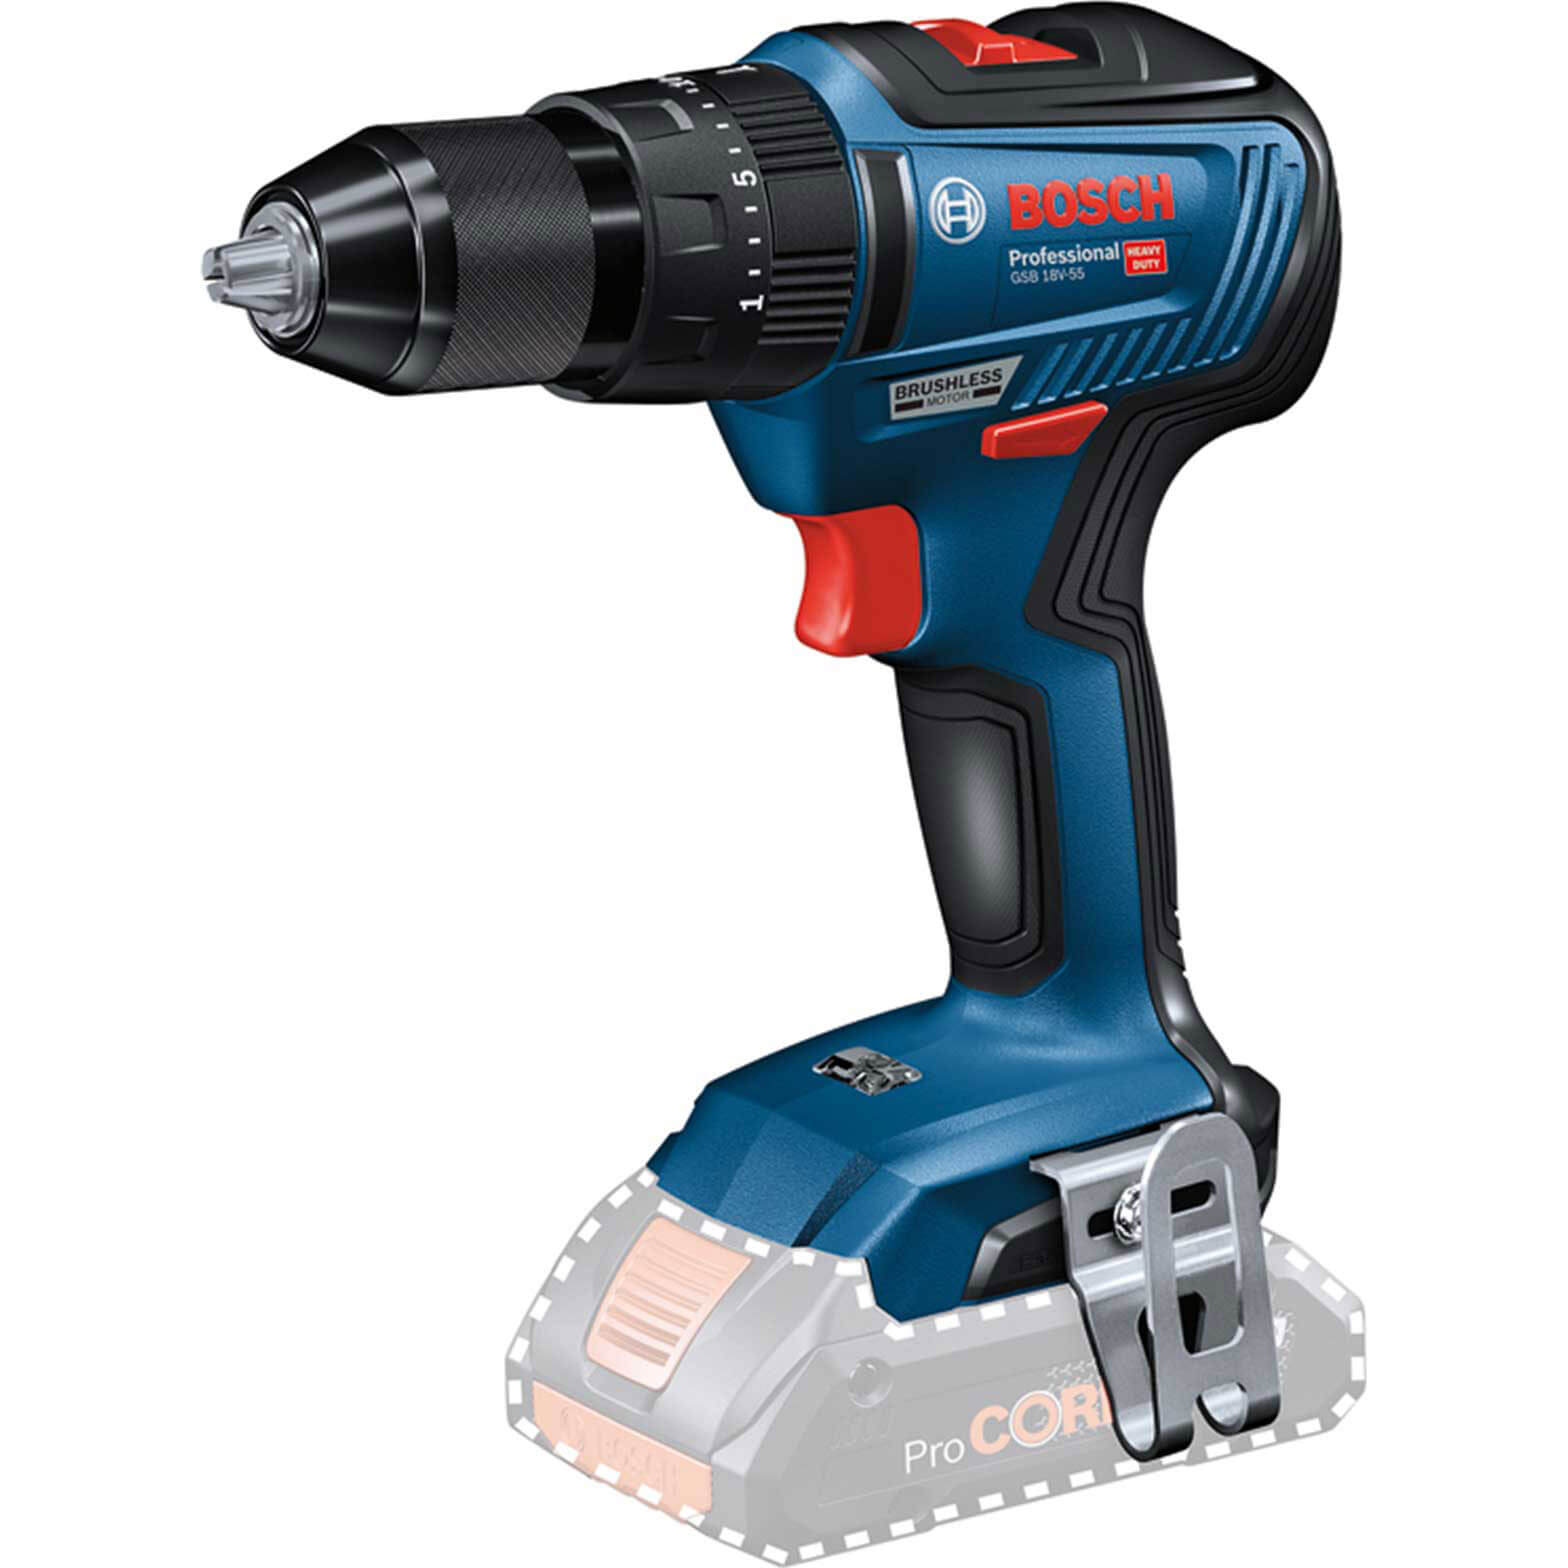 Bosch GSB 18V-55 18v Cordless Brushless Combi Drill No Batteries No Charger No Case